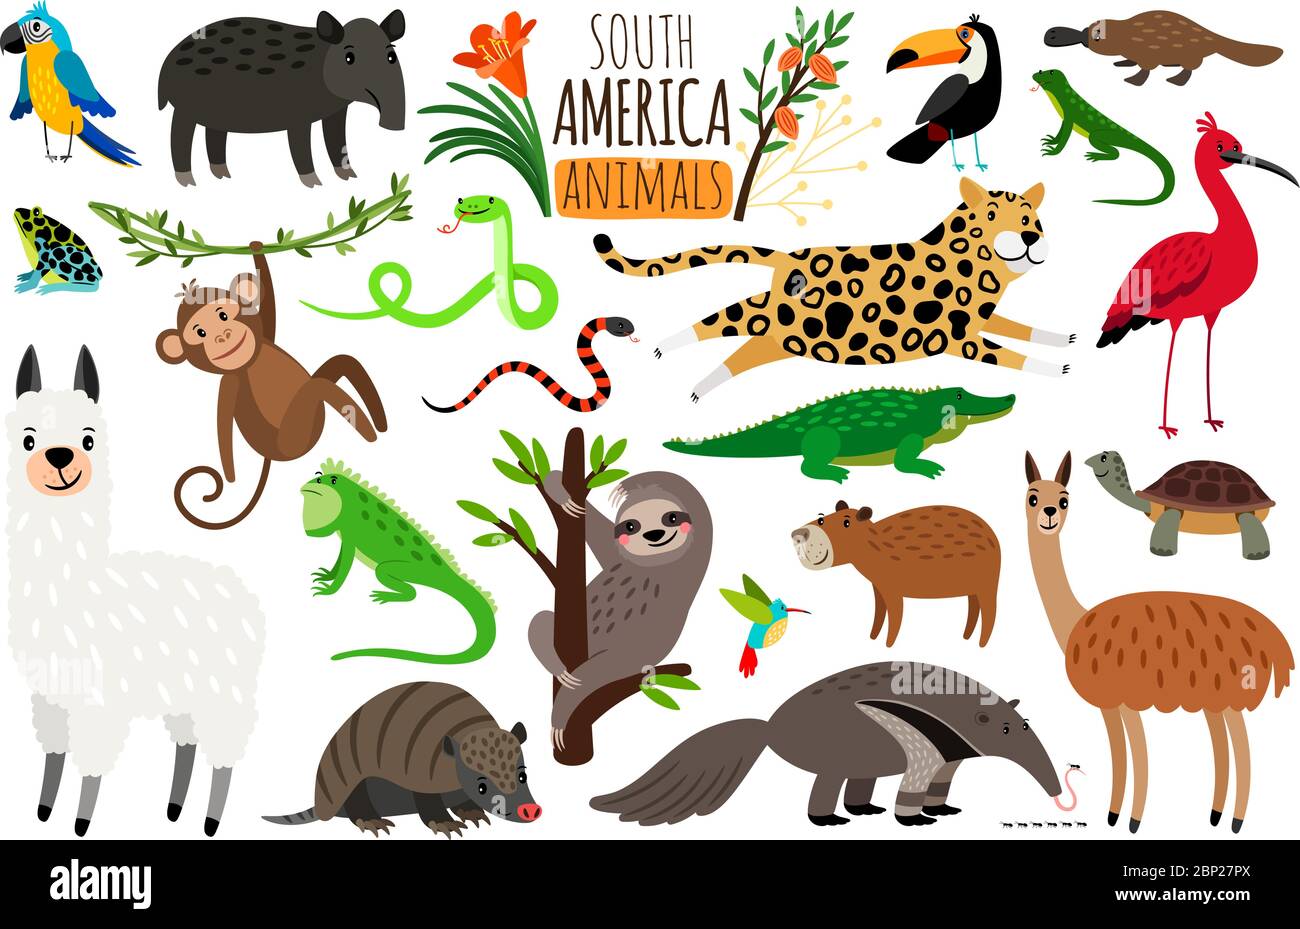 South America animals. Vector cartoon guanaco and iguana, anteater and ocelot, tapir and armadillo isolated on white background Stock Vector